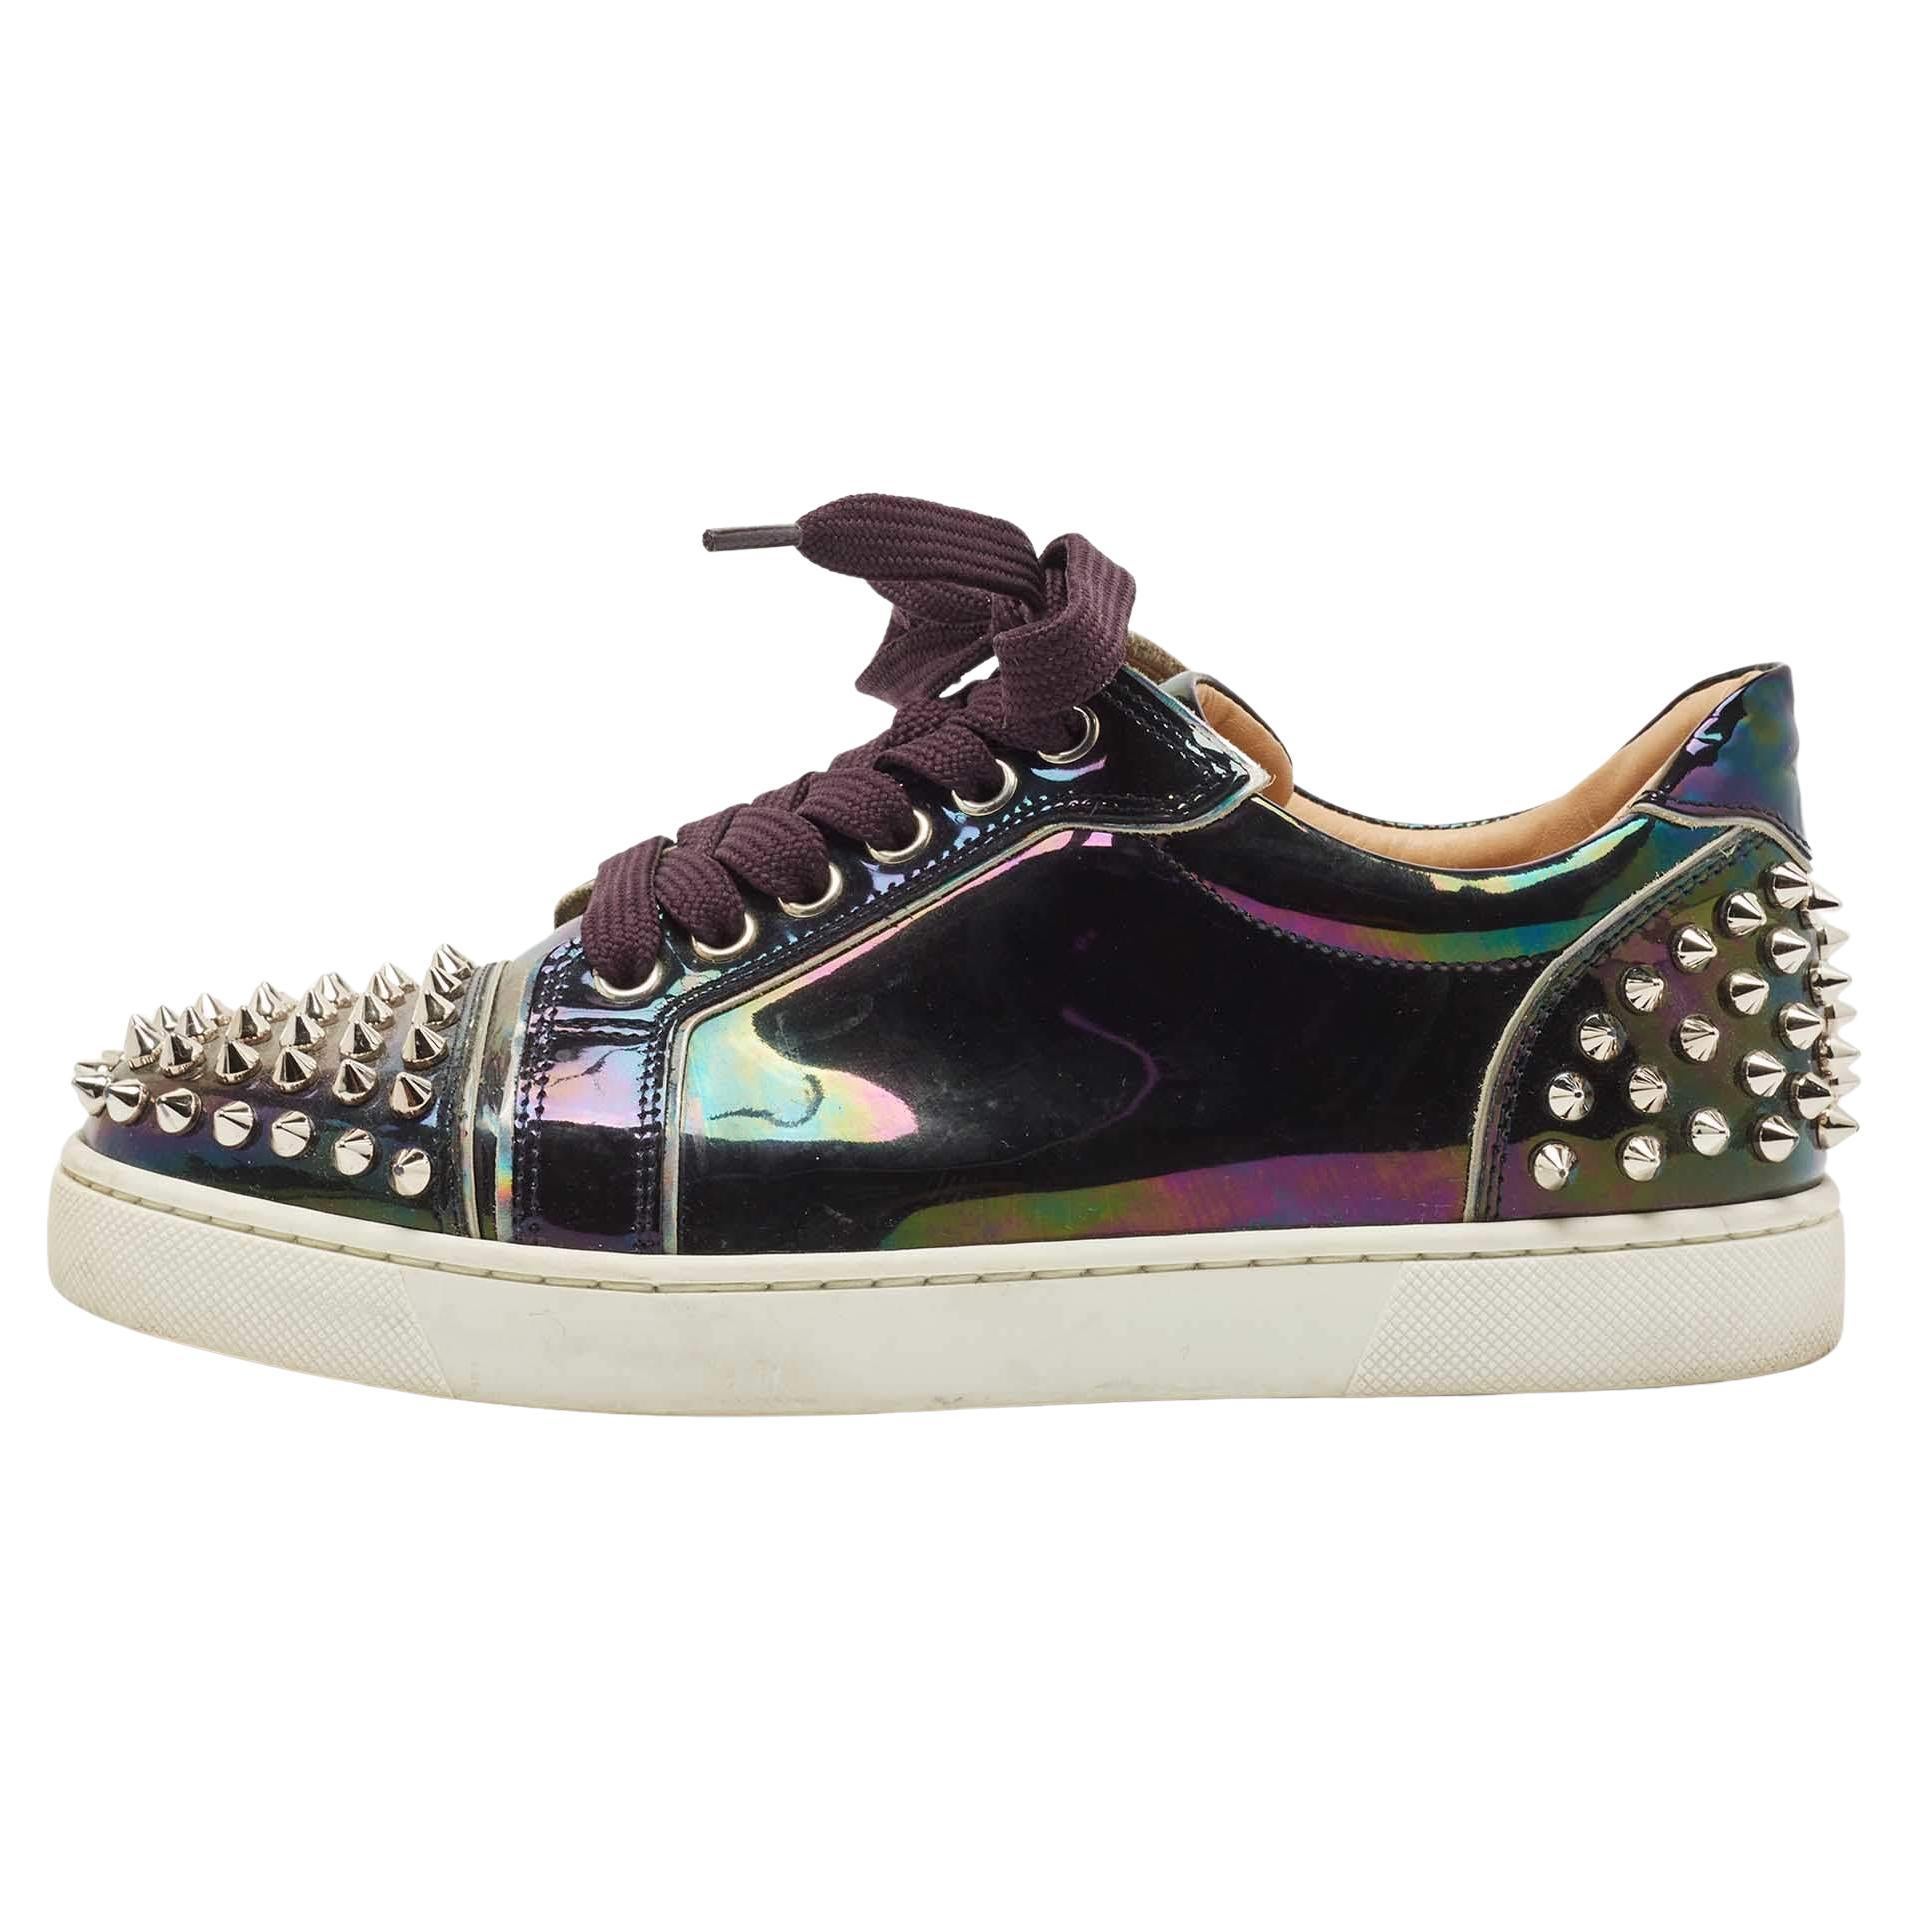 Christian Louboutin Holographic Patent veira Spike Low Top Sneakers Size 36.5